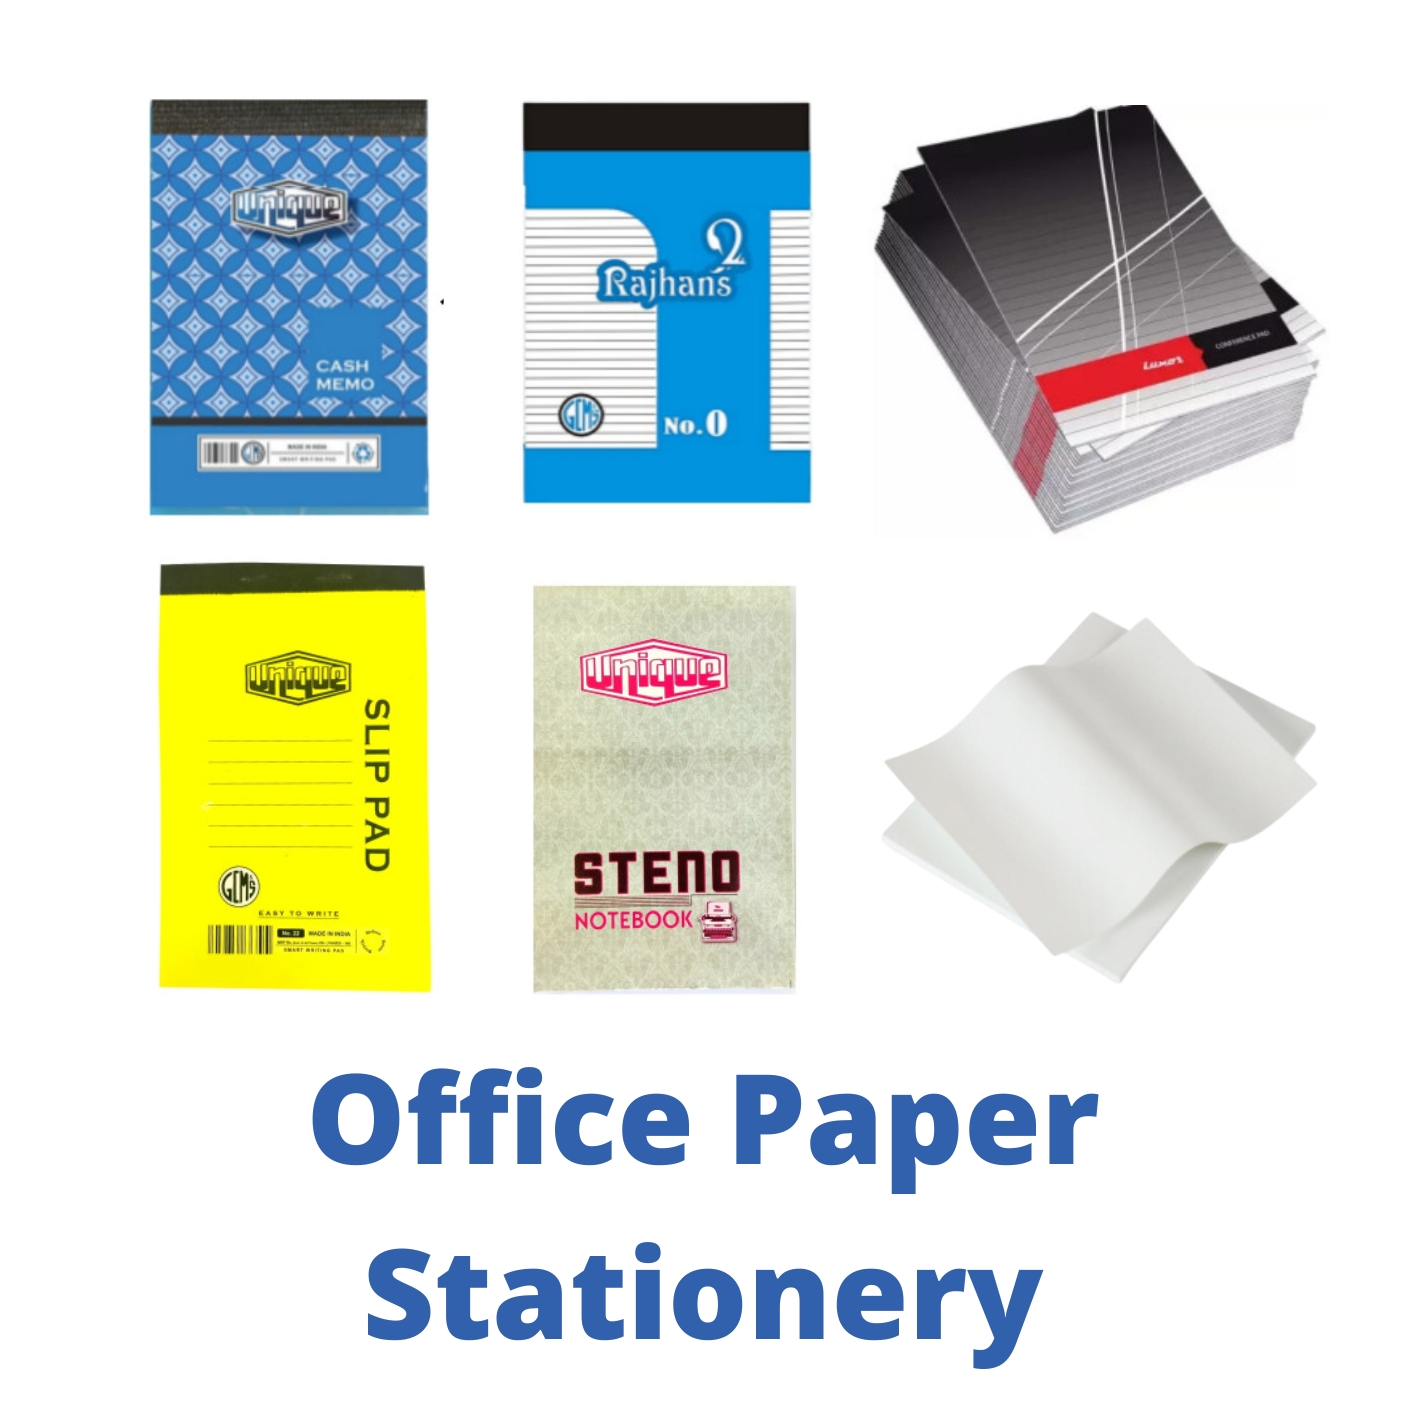 Office Paper Stationery